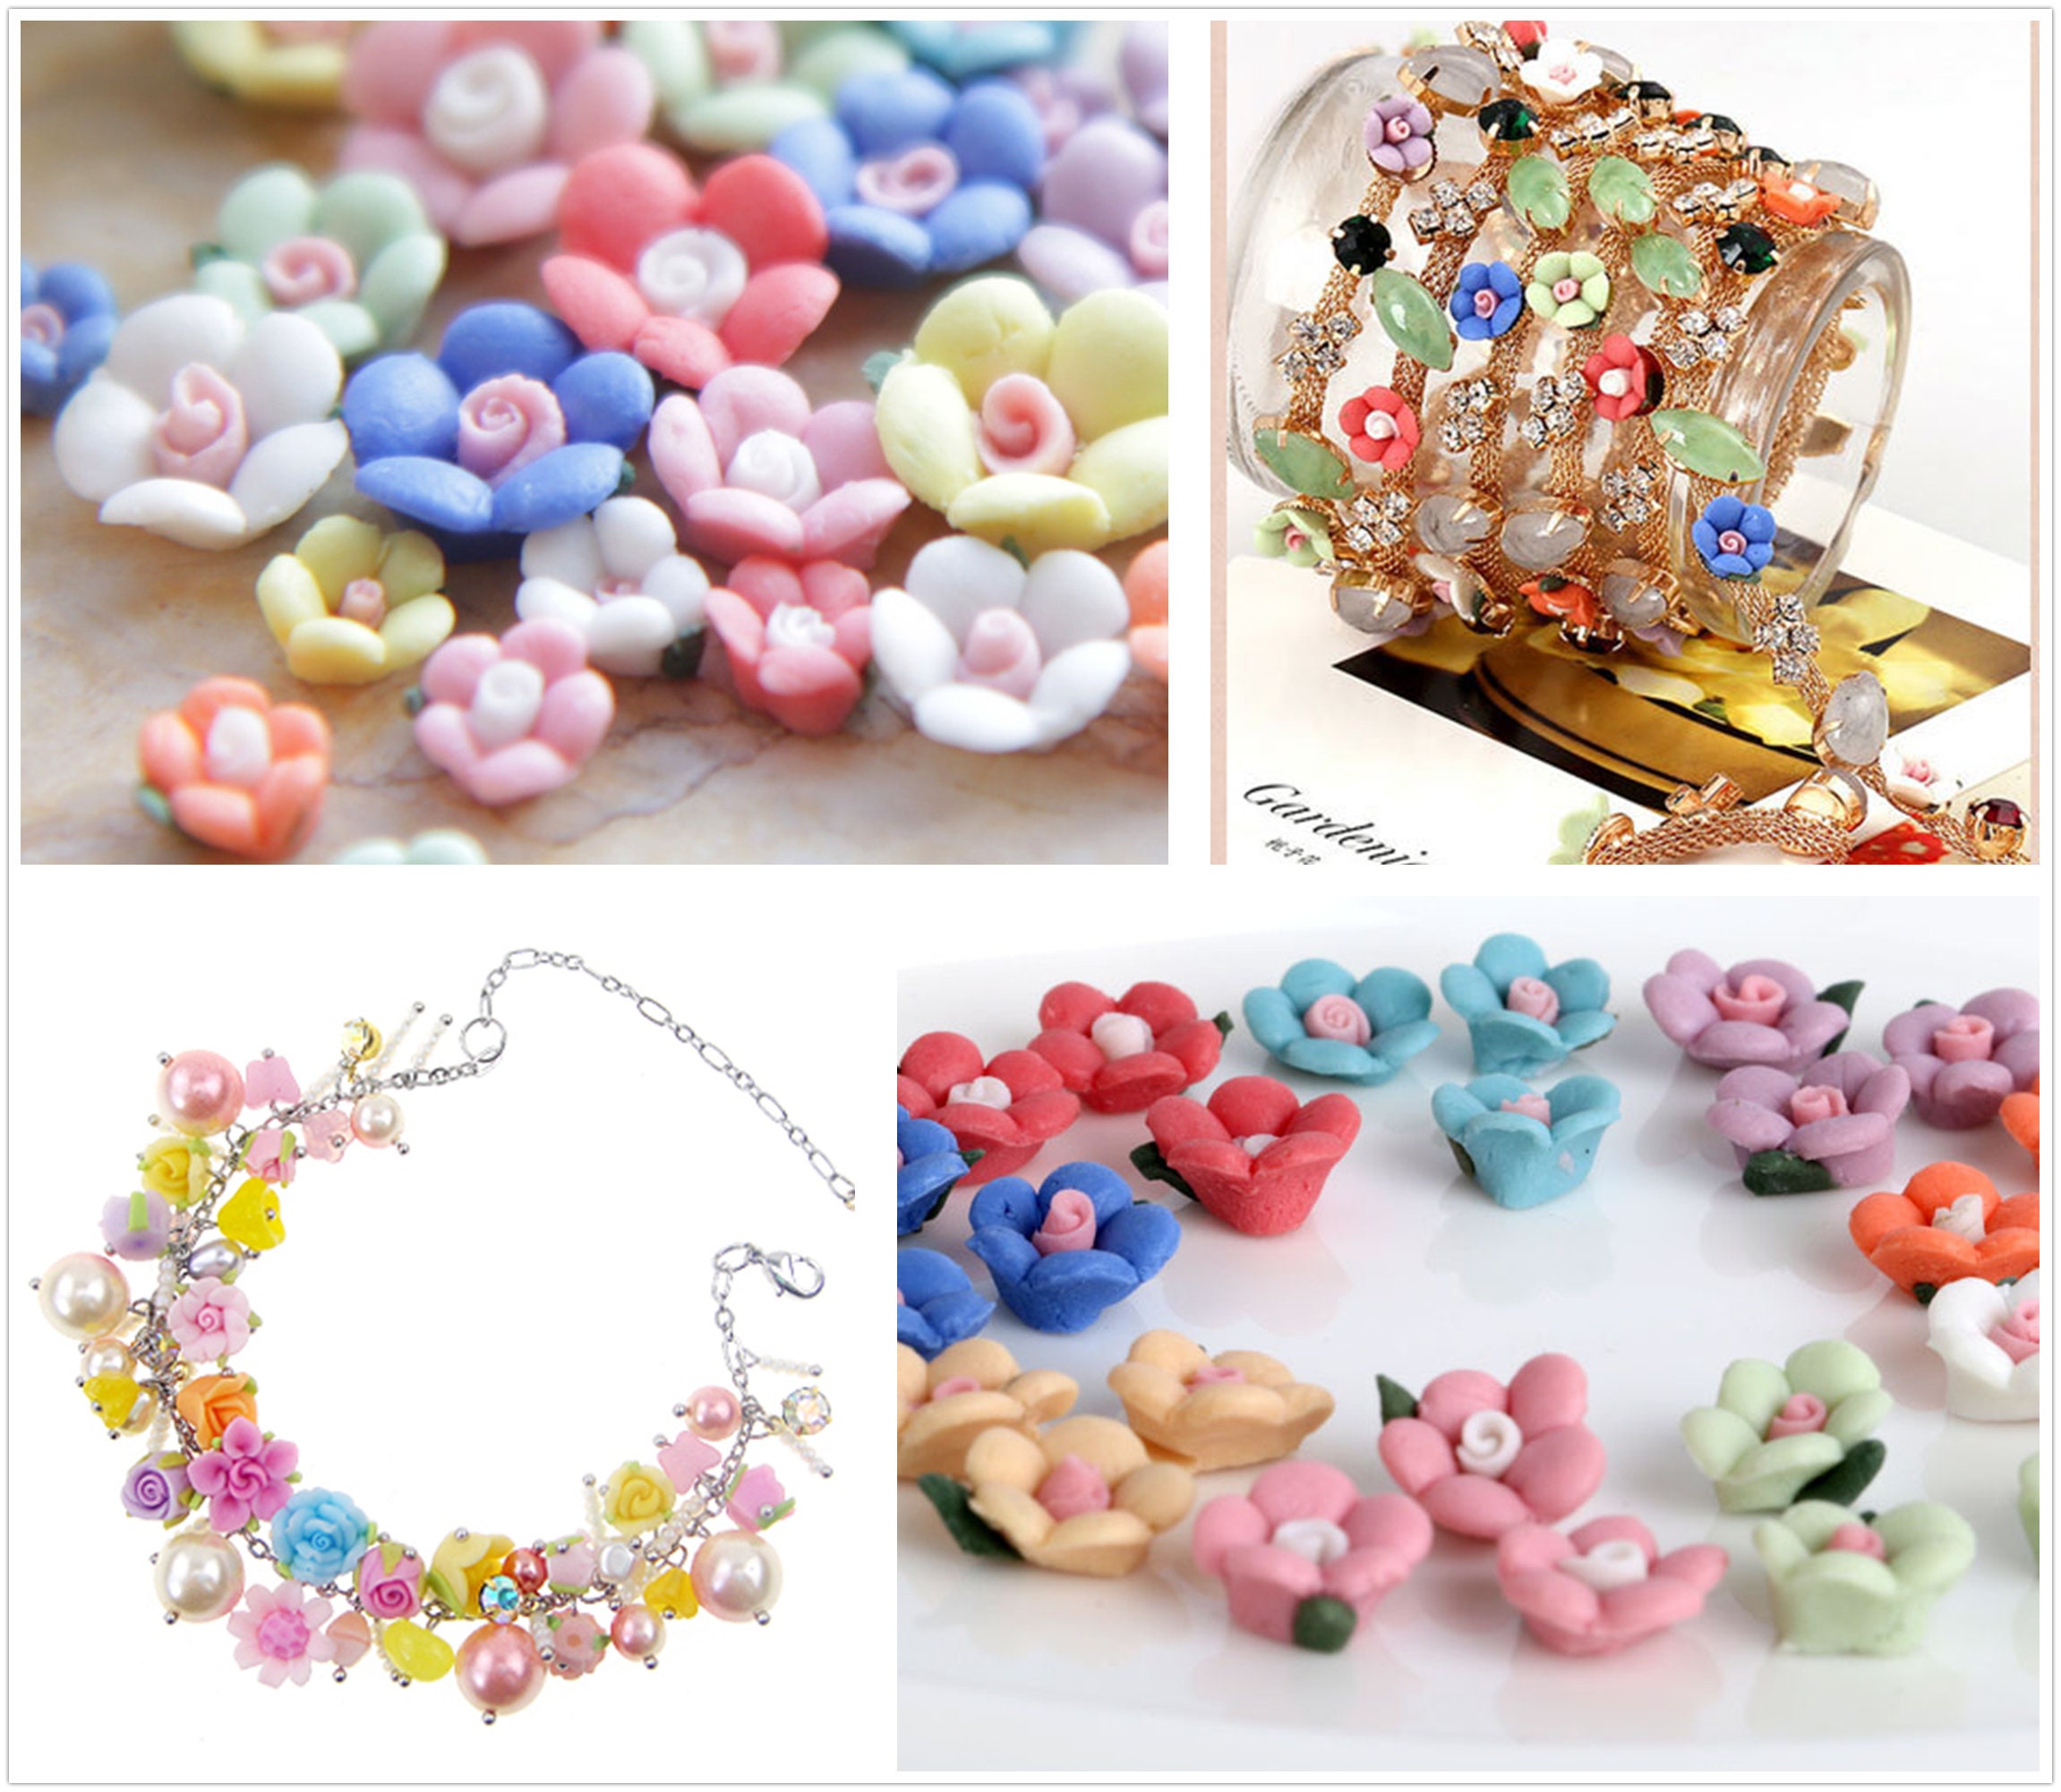 QUSENLON Crystal Resin Clay Jewelry Modeling Flower Making Material Cold  Porcelain Clay Translucent Non-baked Soft Pottery 